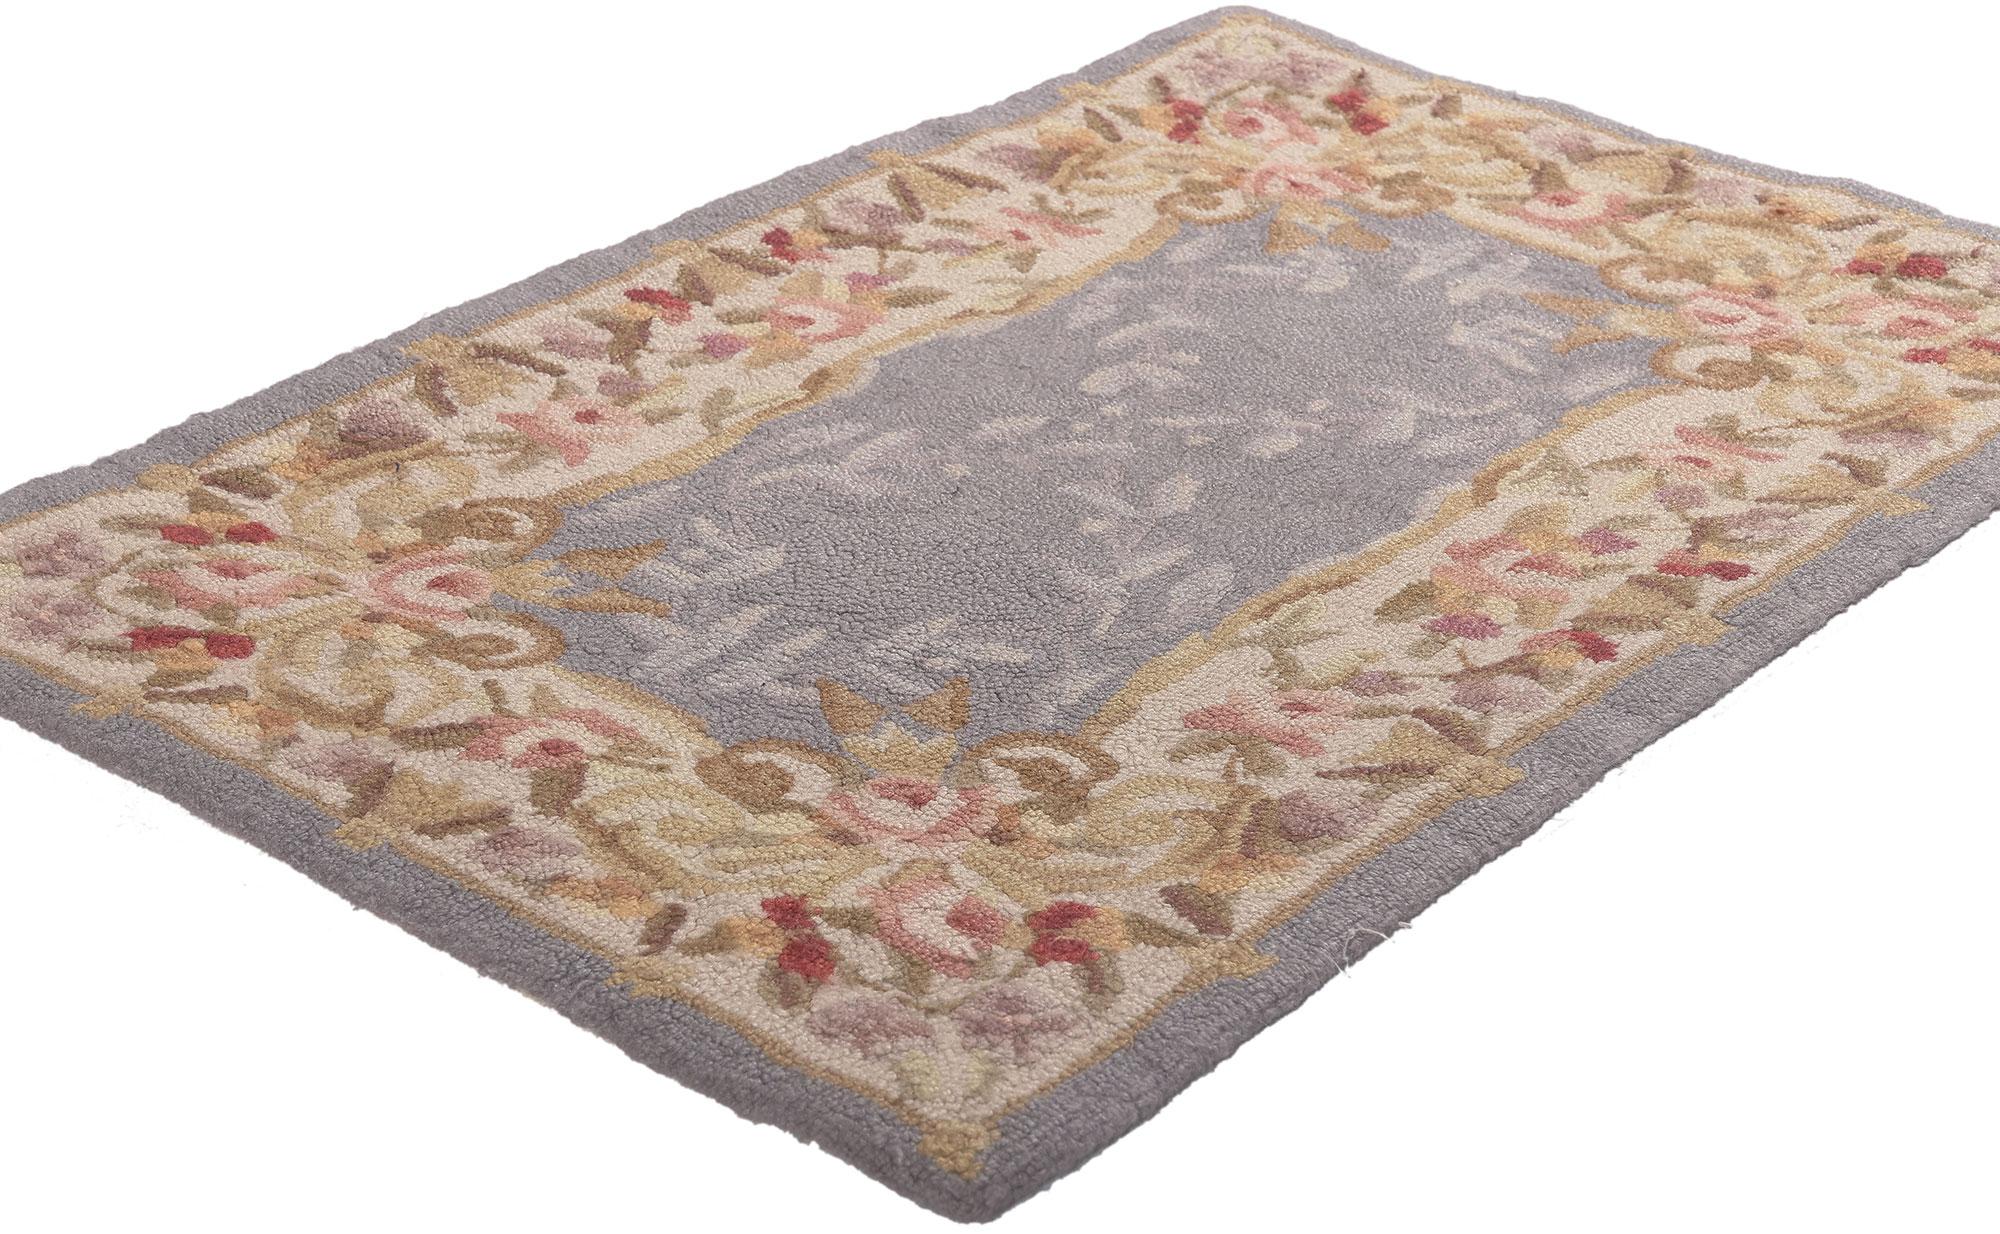 7854 Vintage Aubusson American Hooked Rug, 01'09 x 02'08.
Take a floral design and understated elegance, mix in a dash of romantic connotations and rustic sensibility to get this fresh look that’s as comfortable as it is chic. The composition